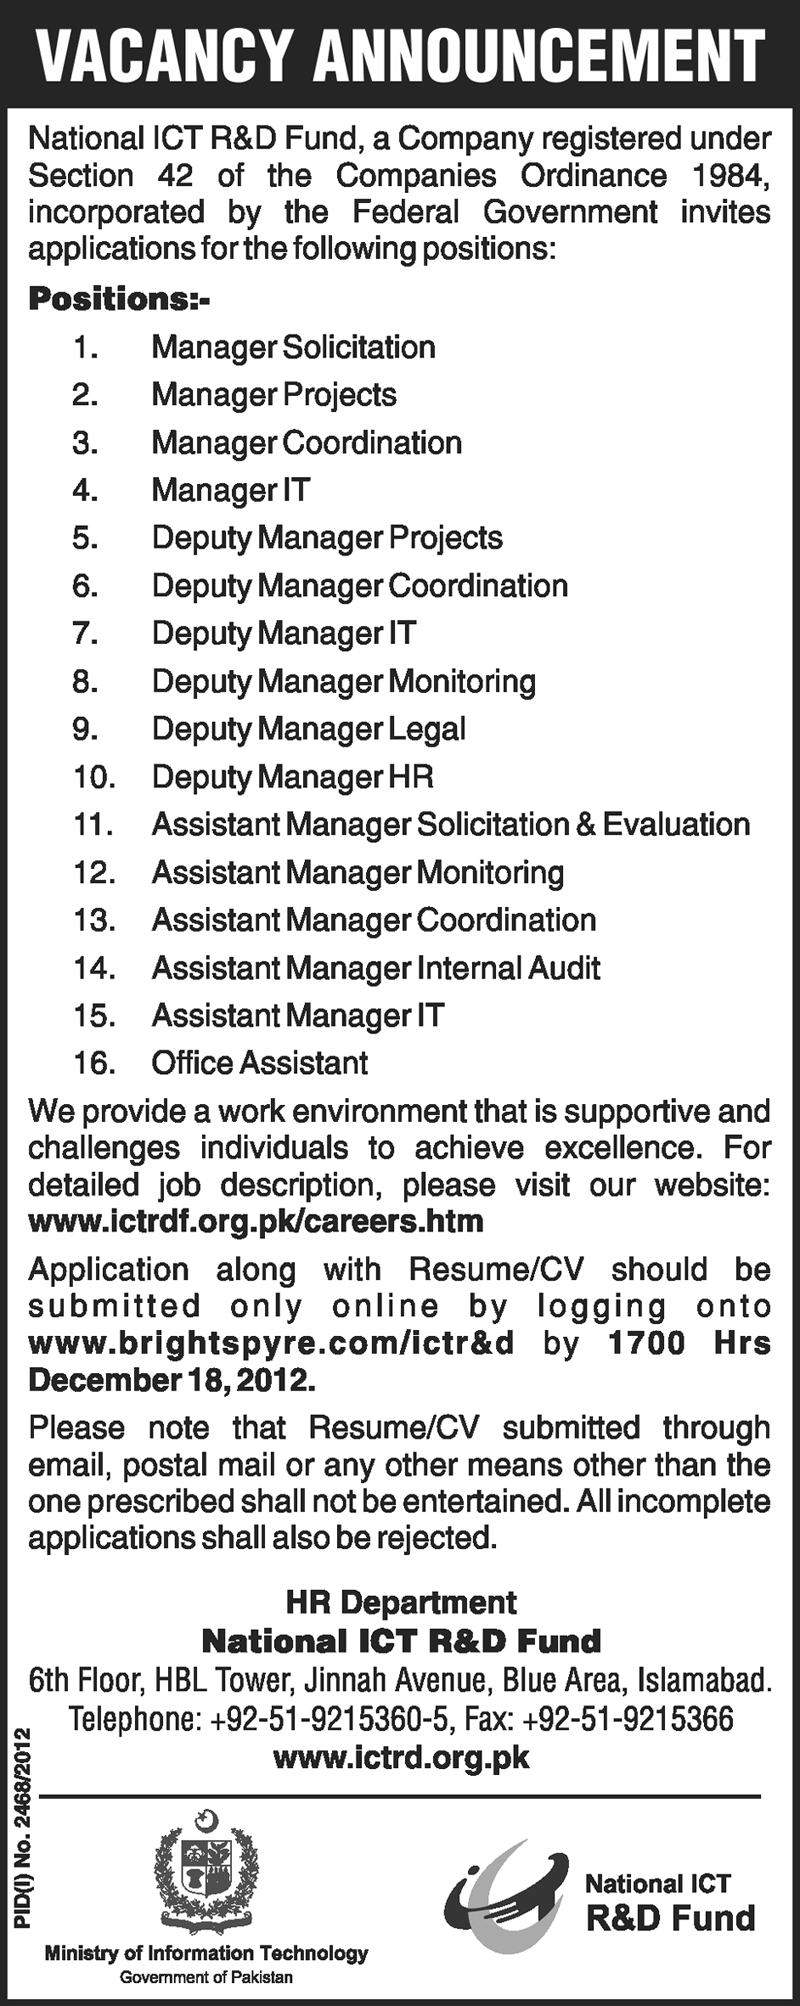 www.brightspyre.com/ictr&d National ICT R&D Fund Jobs Islamabad